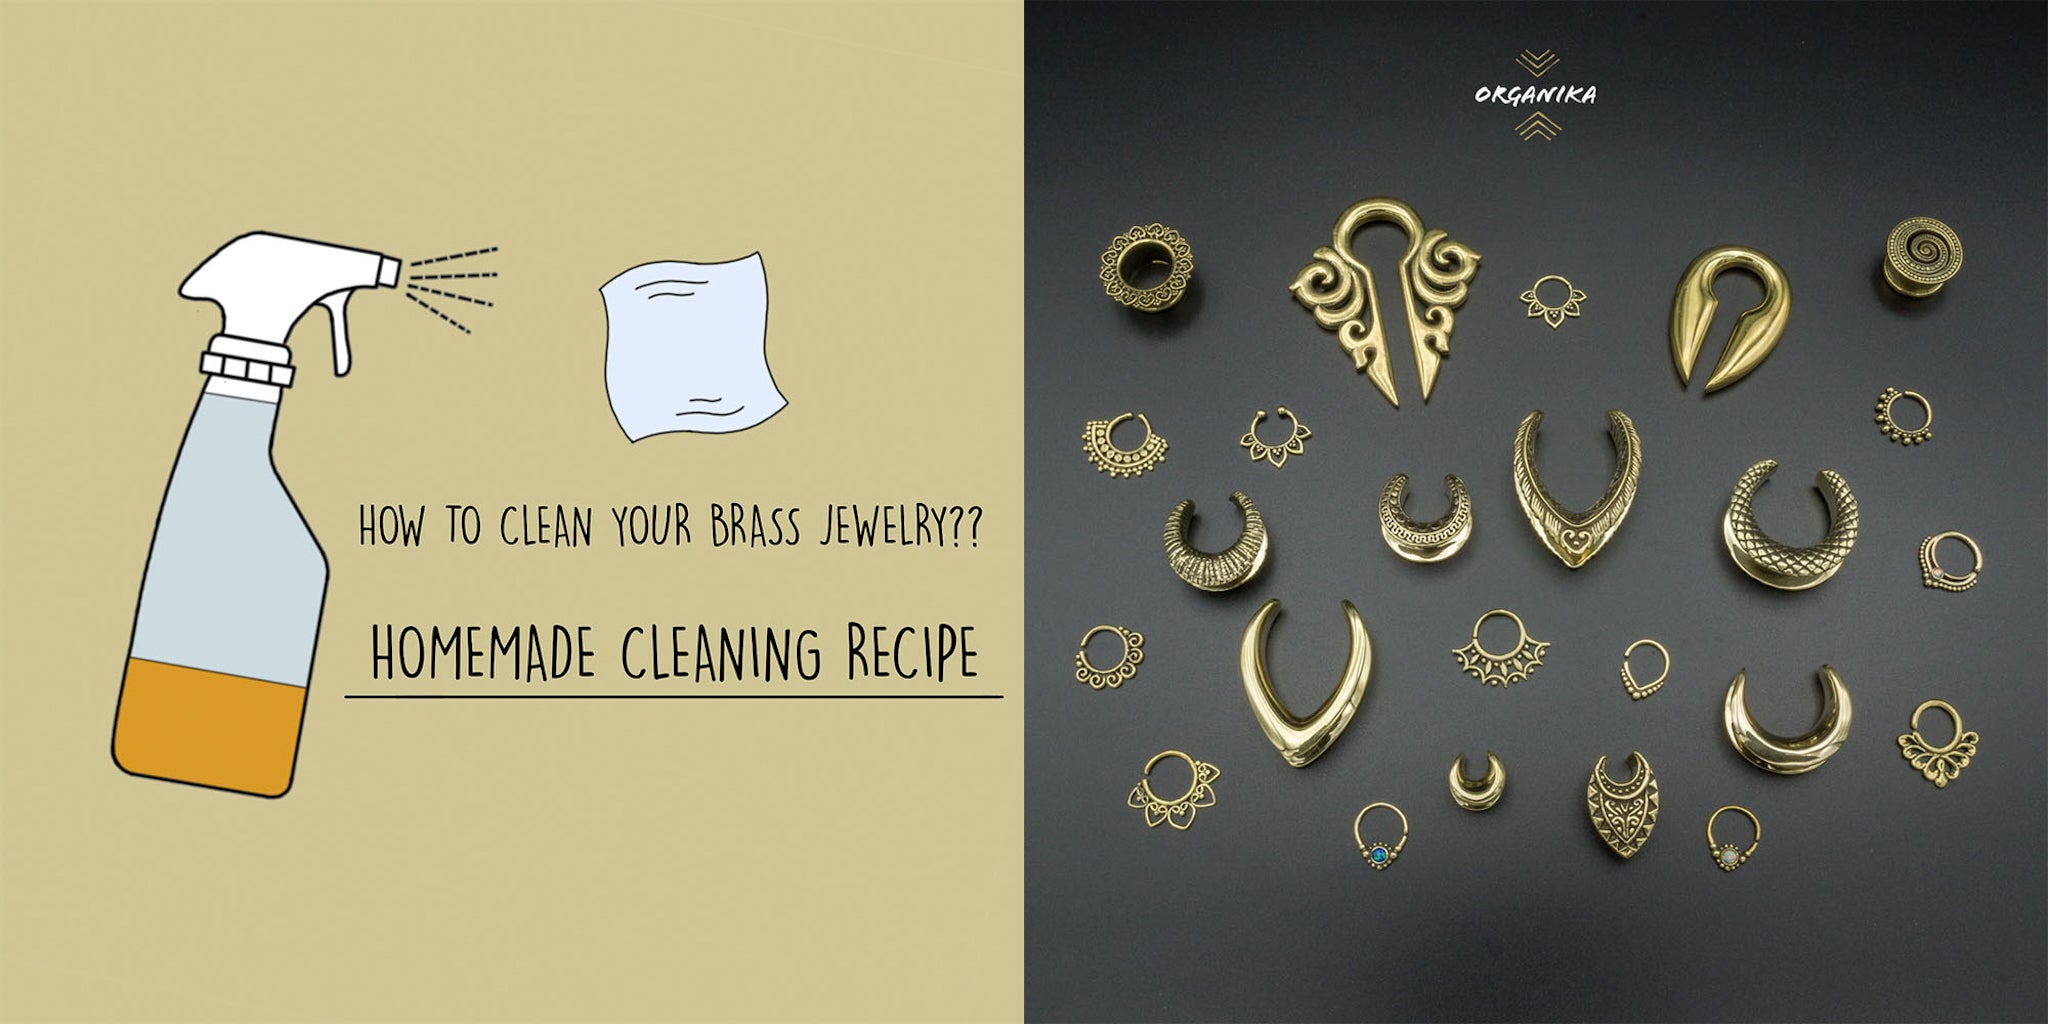 How to clean brass – copper jewellery